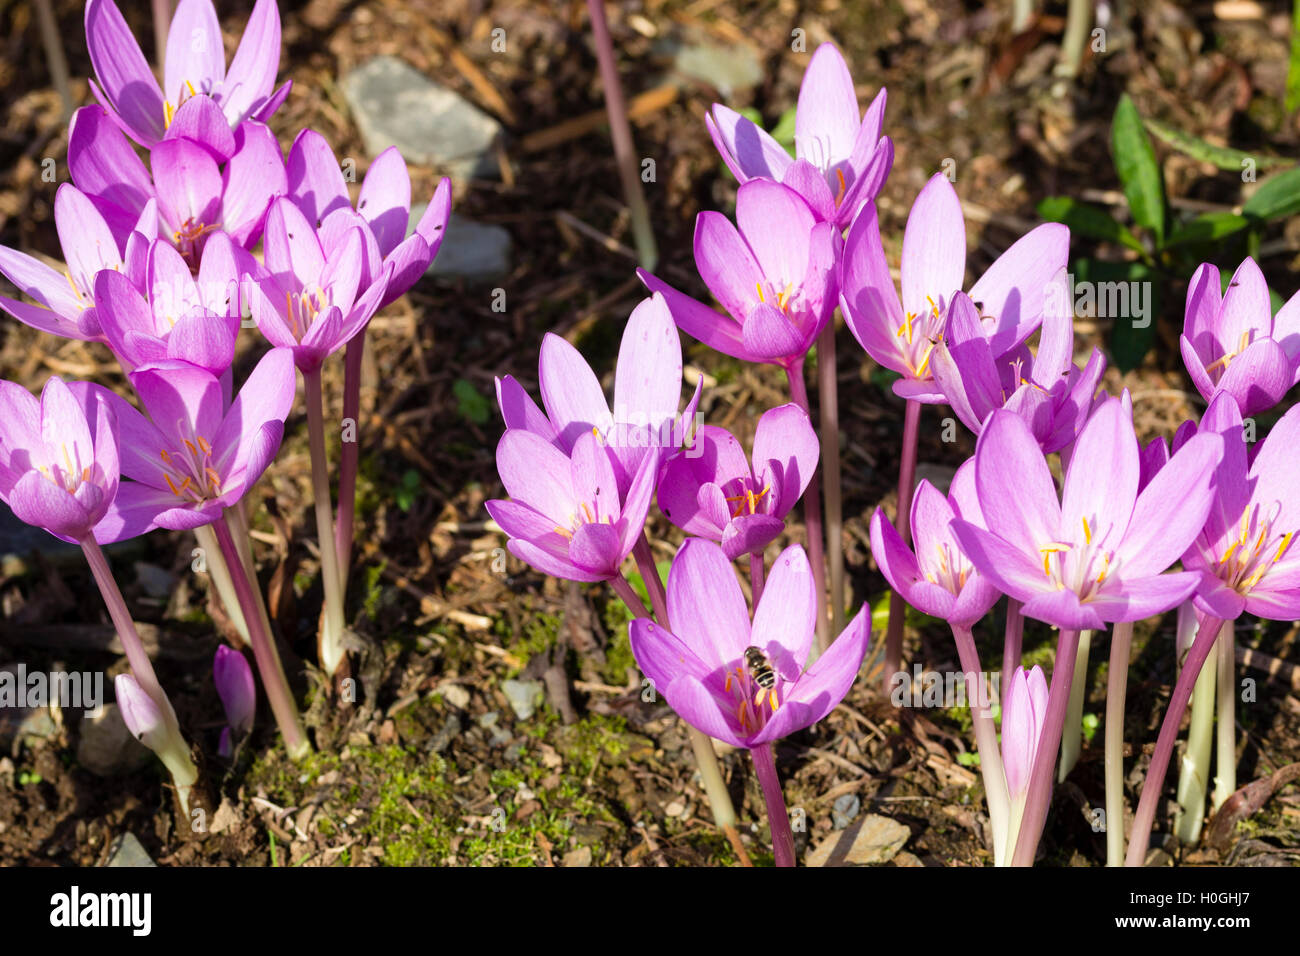 Pink September flowers of the meadow saffron, Colchicum autumnale  'Nancy Lindsay' Stock Photo